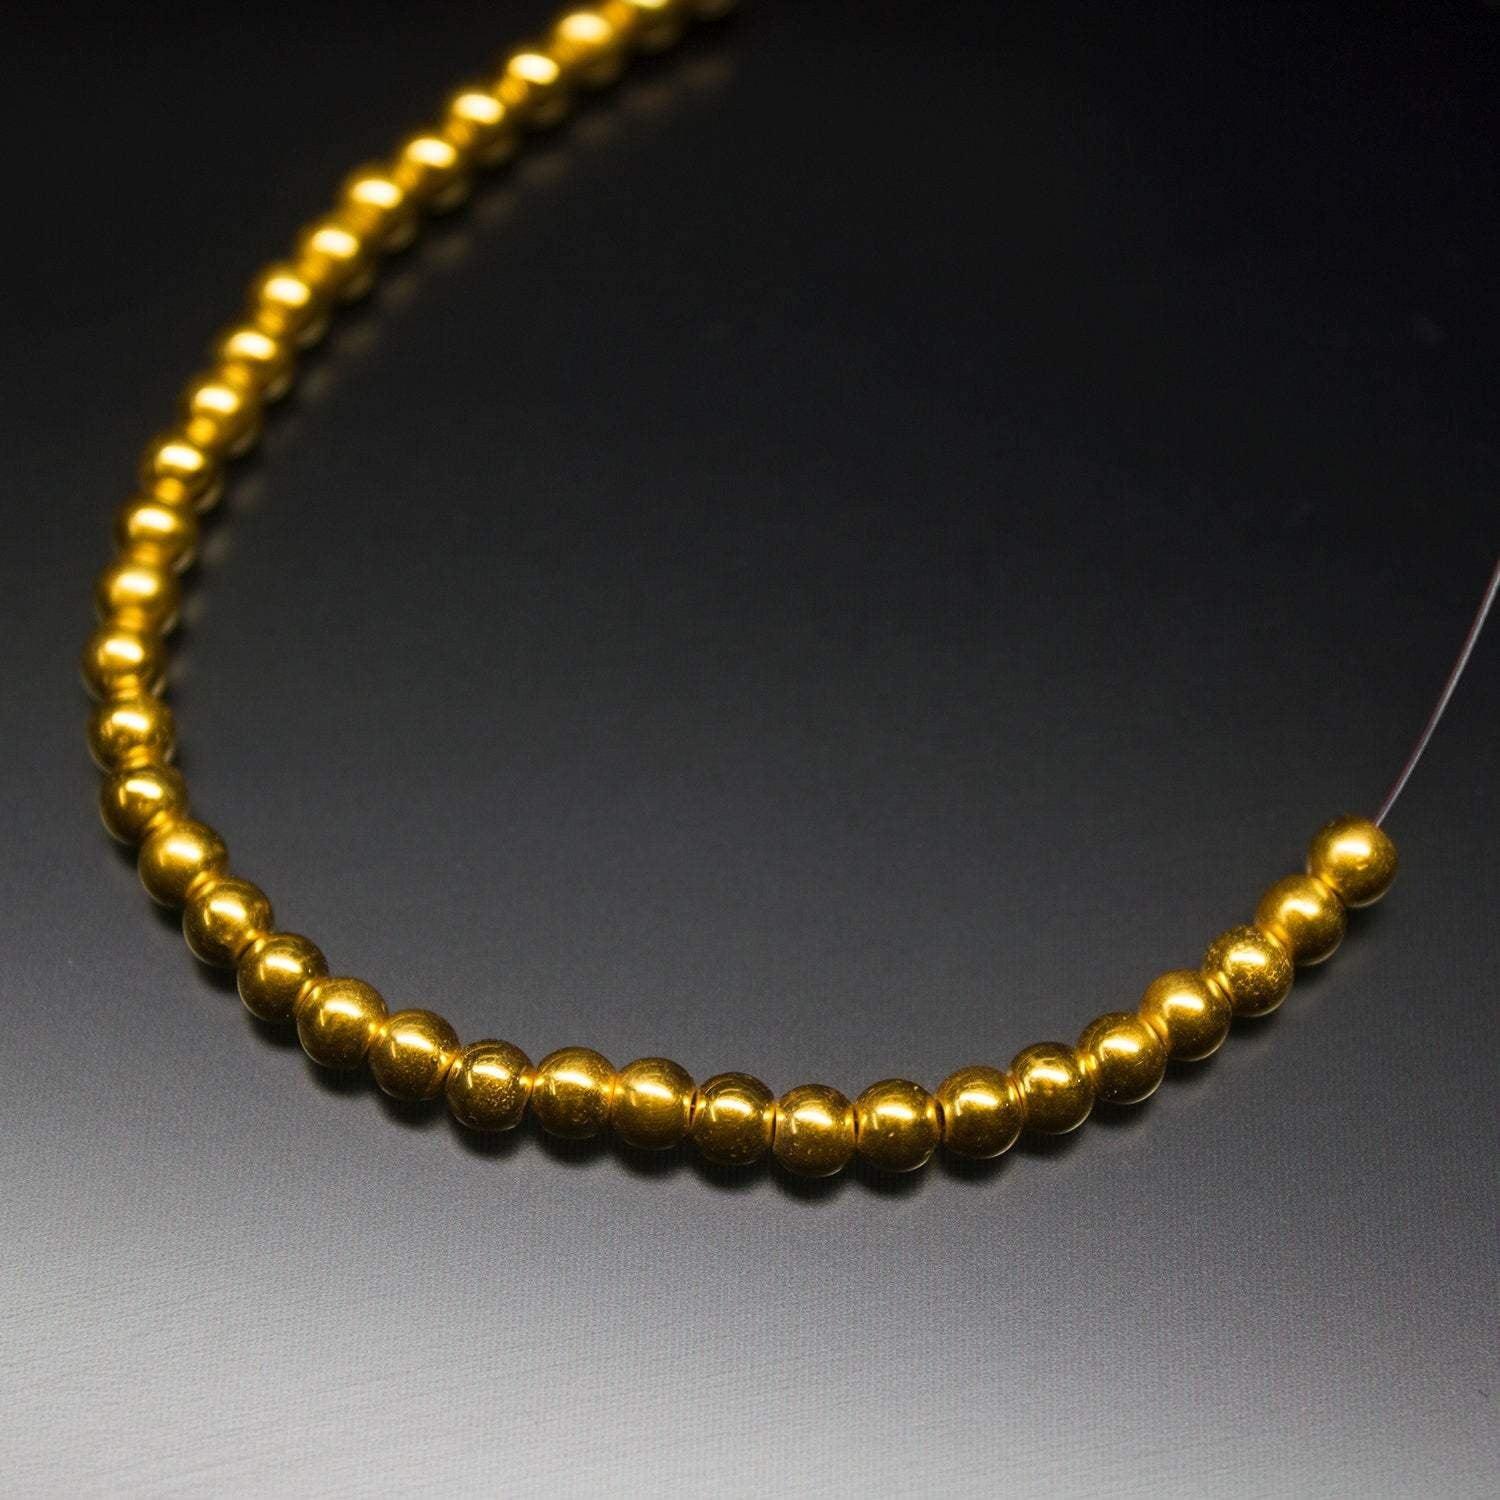 5 Strand Solid Gold Layered Necklace Spacer / 14k 18k Solid Gold Finding /  Gold Jewelry Supply / Christmas Sale